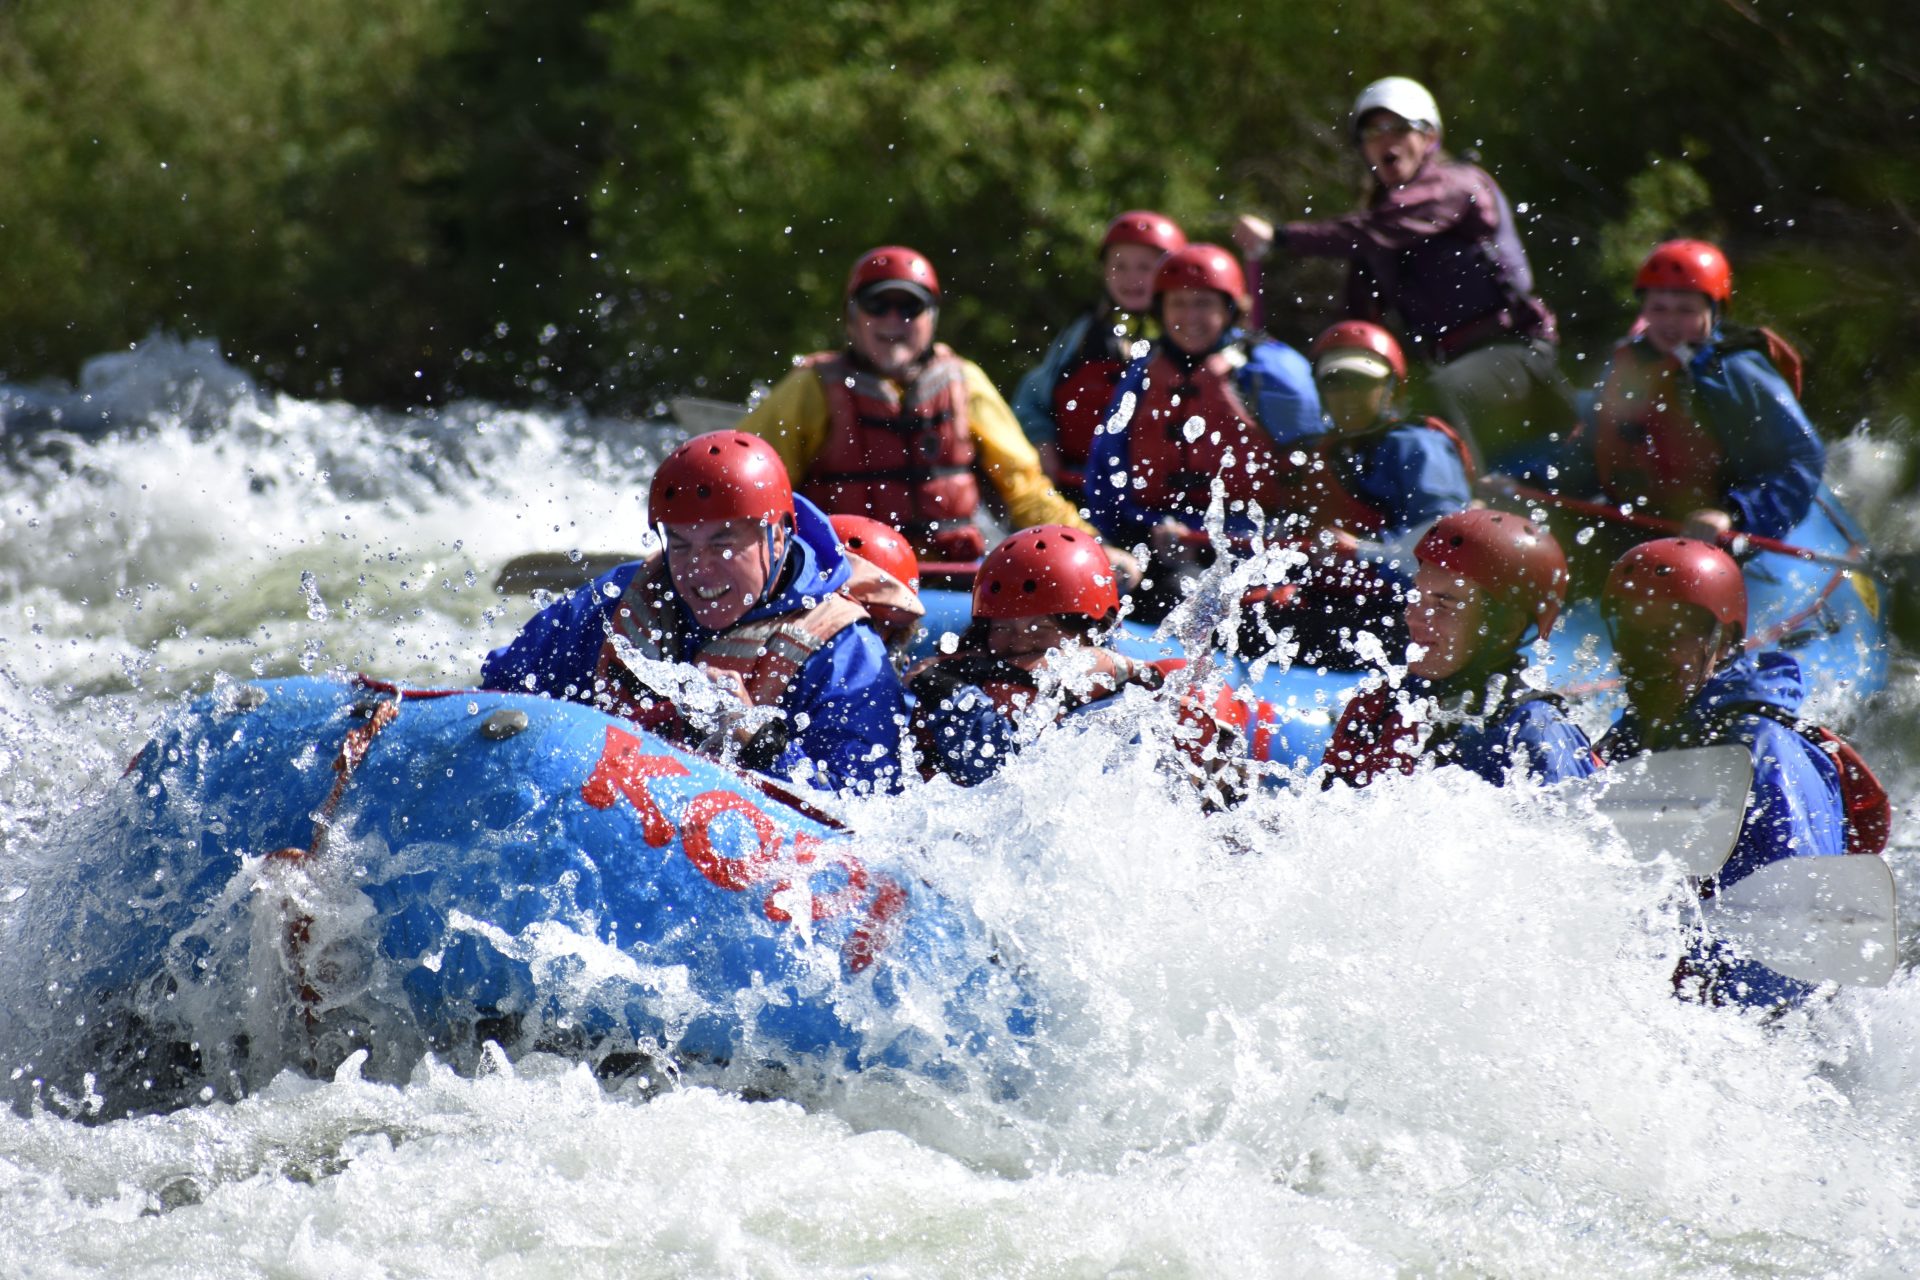 If you are ready to try rafting and zipline with your family, we are here to assist you.